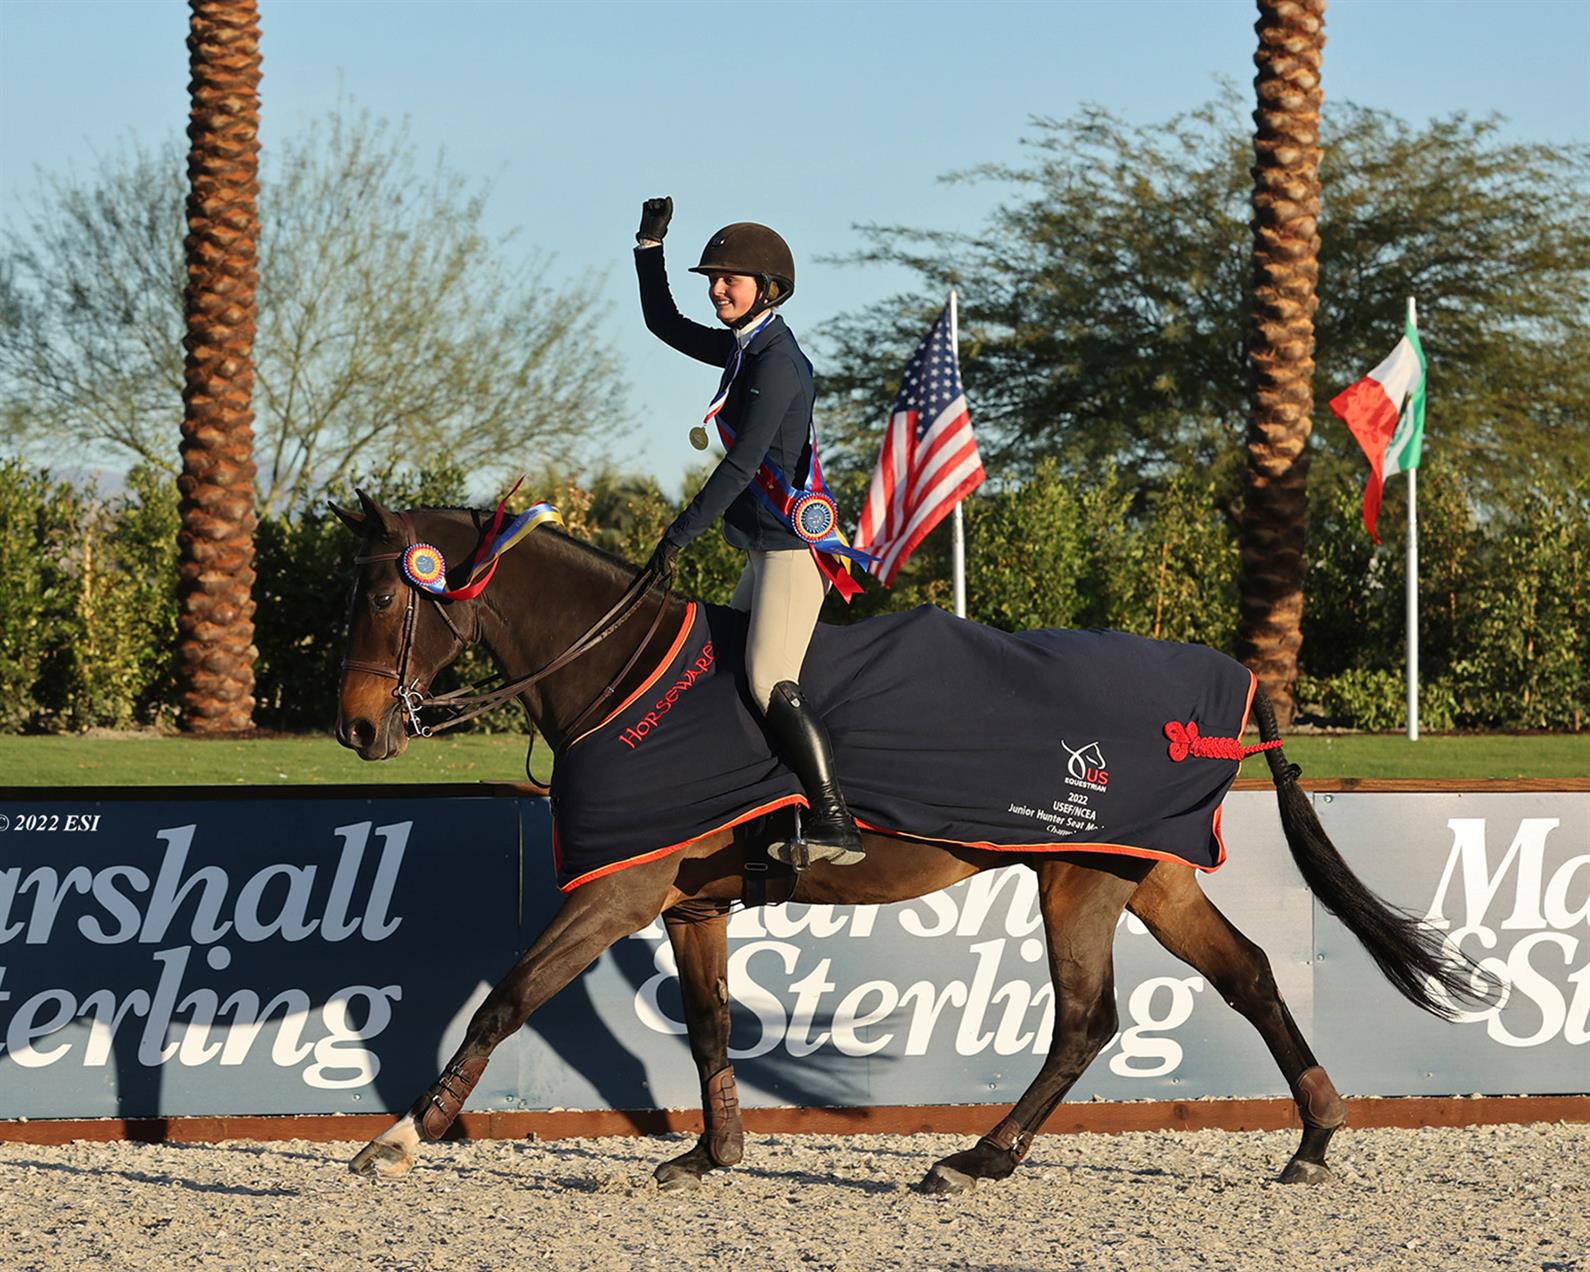 Ella Dyson at the USEF/NCEA Medal Final